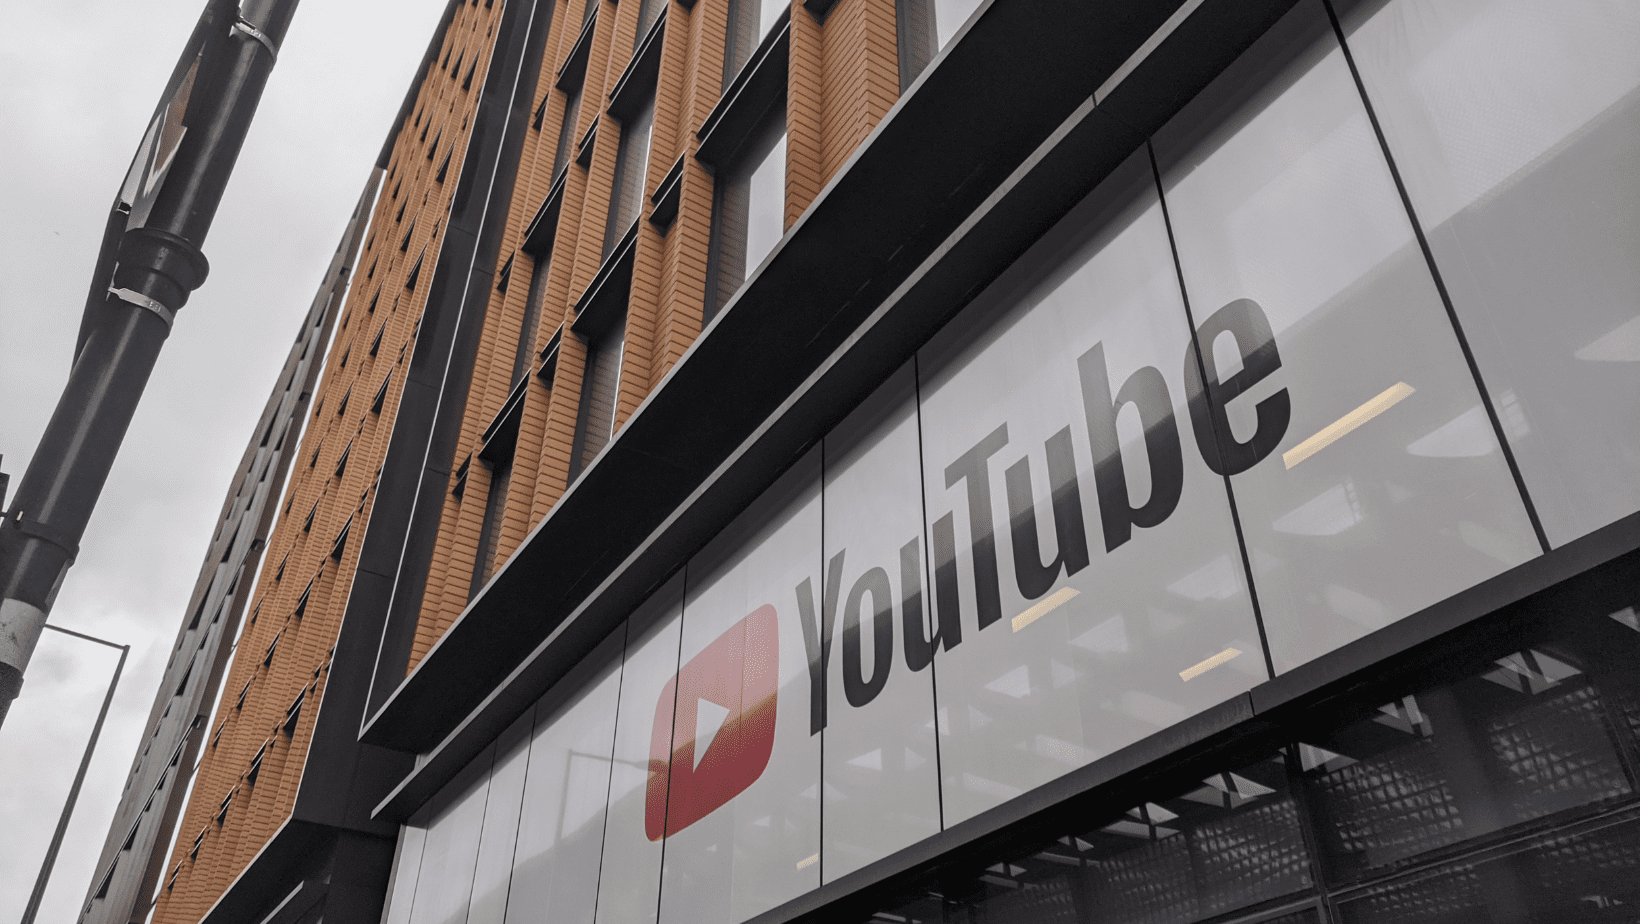 YouTube’s Redesigned Rules: Warnings, Learning, and Balance